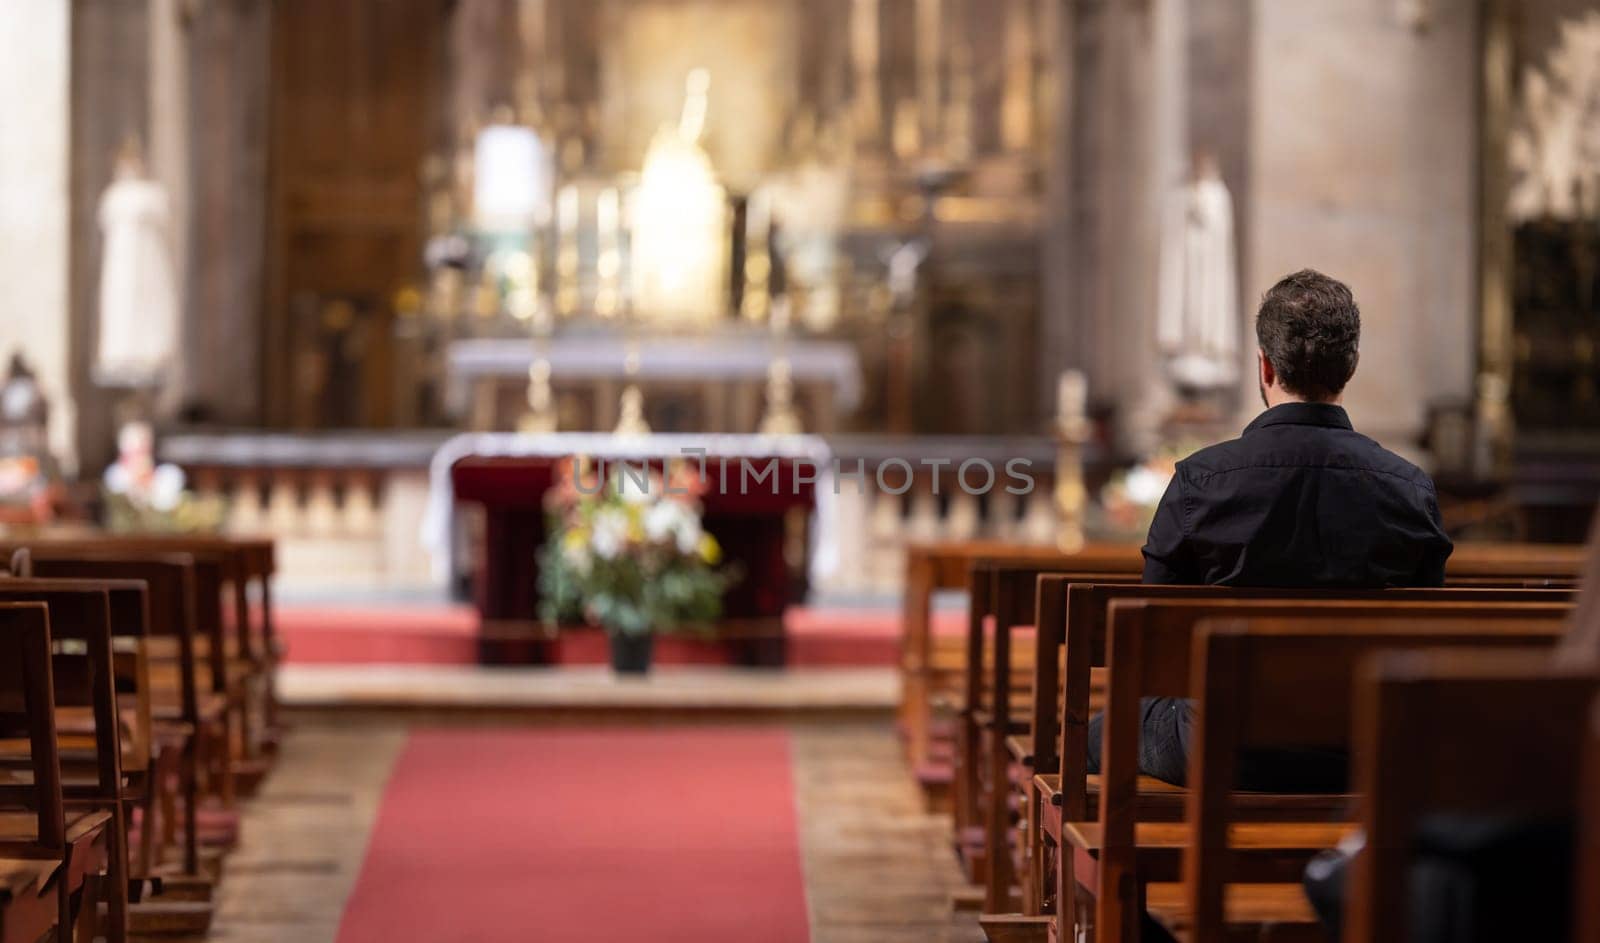 A man sitting in a church looking at the alter by Studia72